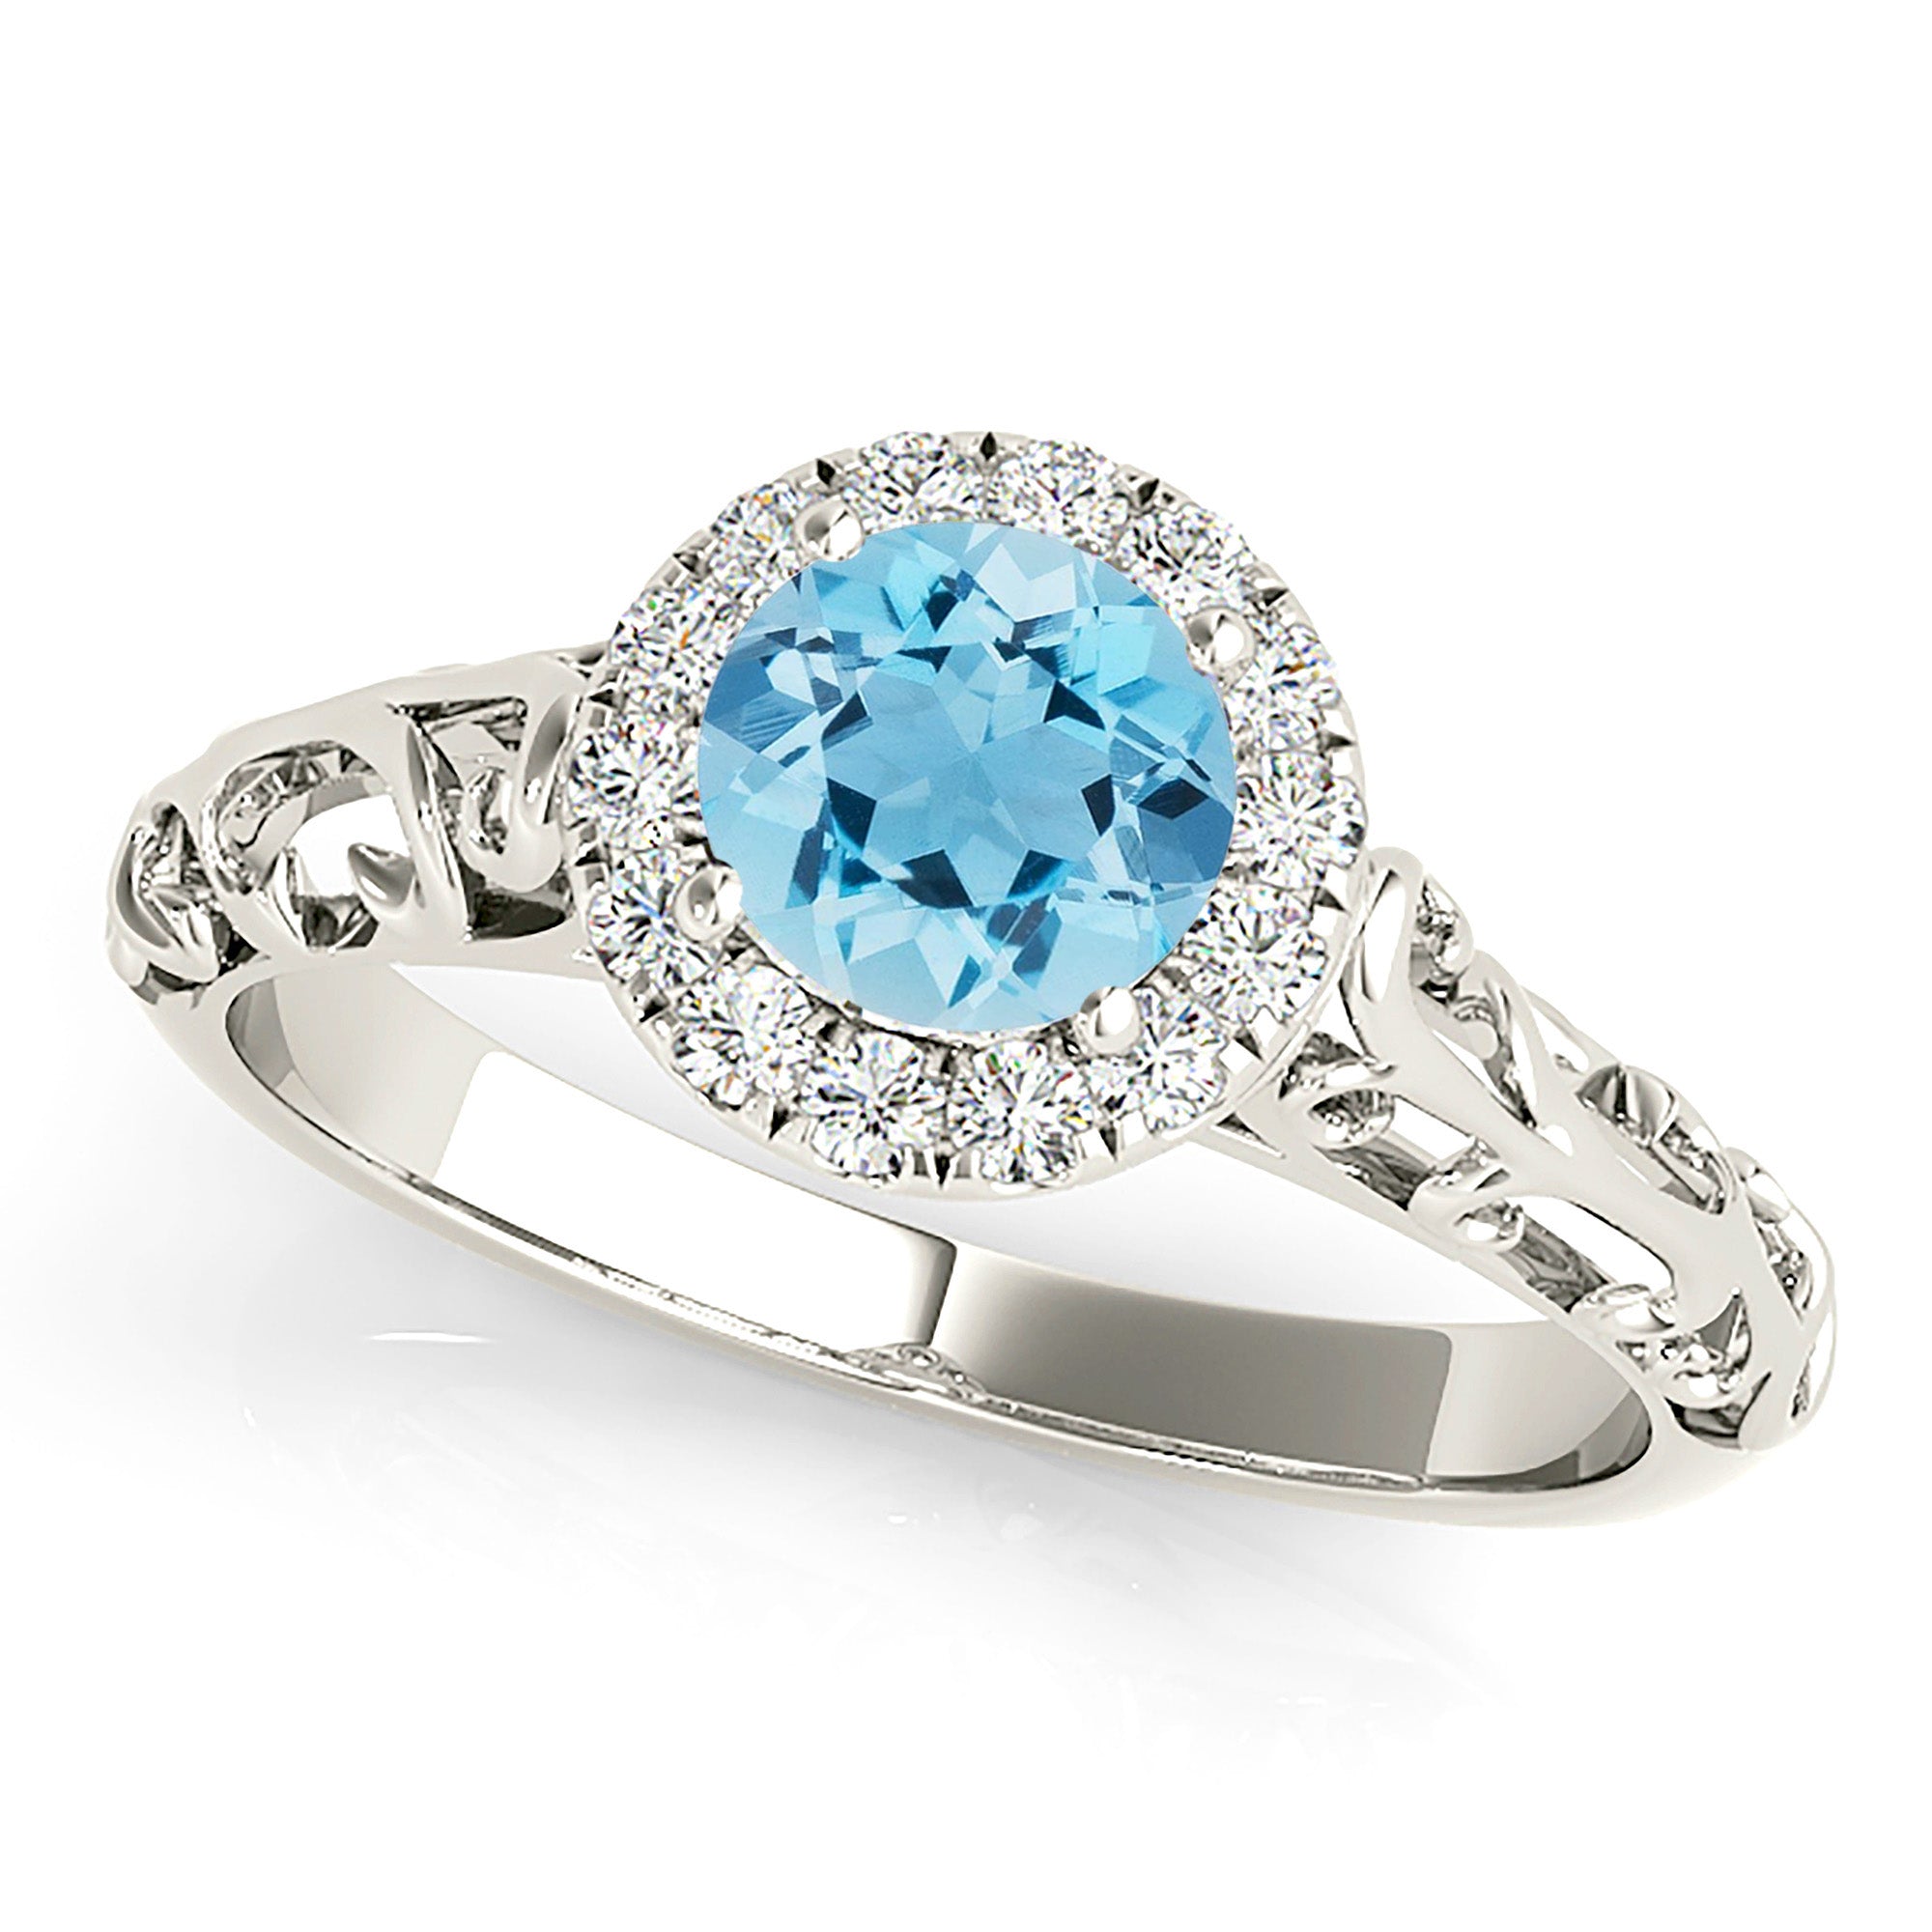 1.00 ct. Genuine Aquamarine Ring With 0.10 ctw. Diamond Halo, Floral Basket and Hand carved Fancy Band | Round Blue Aquamarine Halo Ring-in 14K/18K White, Yellow, Rose Gold and Platinum - Christmas Jewelry Gift -VIRABYANI